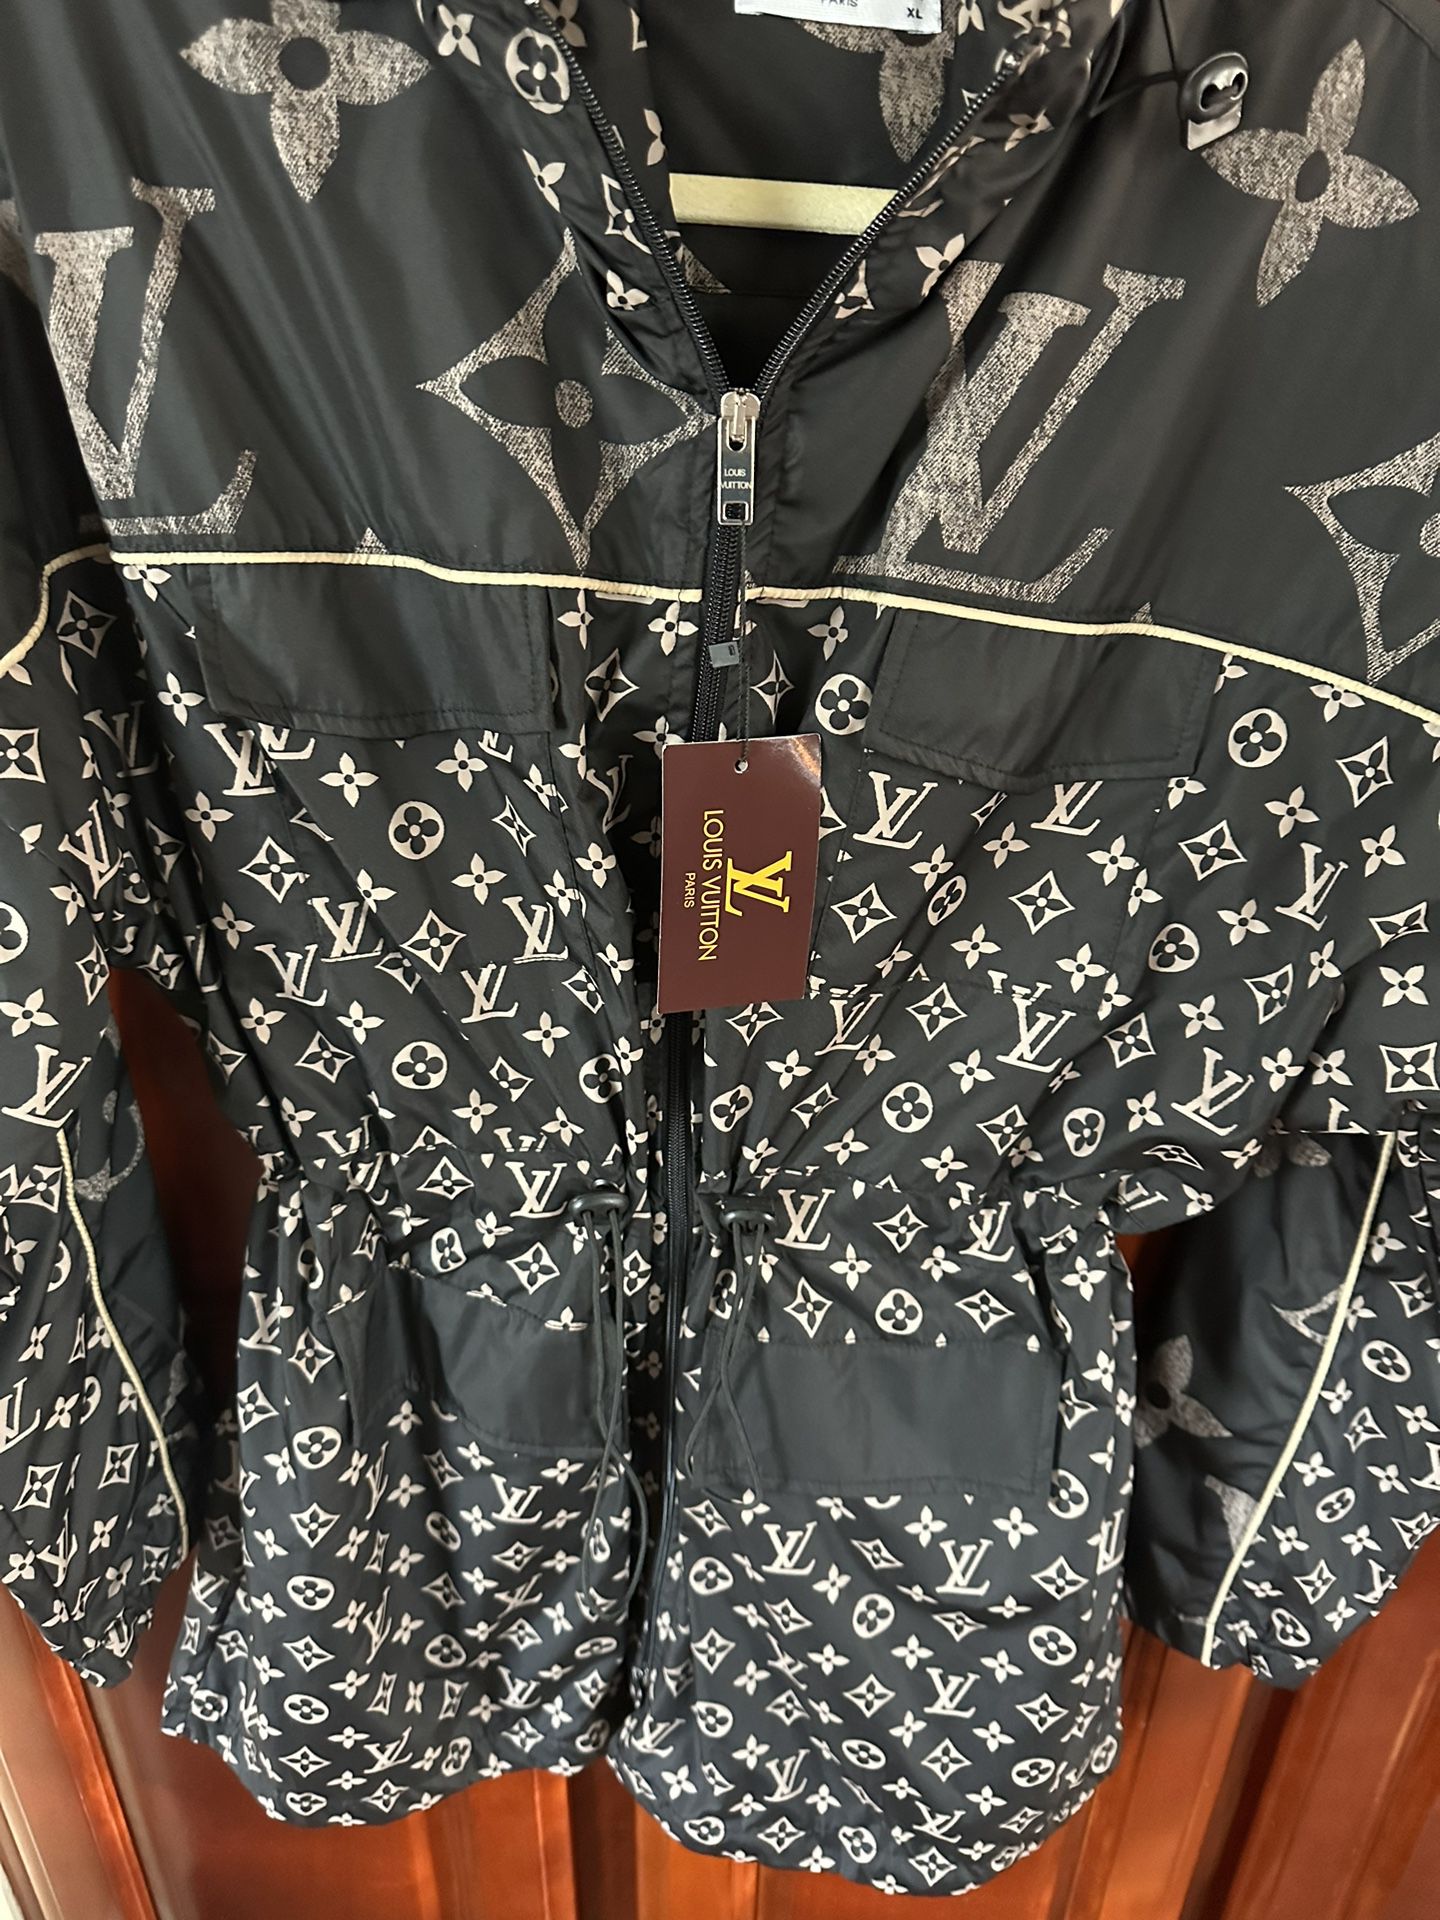 Beautiful LV Jacket for Sale in Lakewood, CA - OfferUp